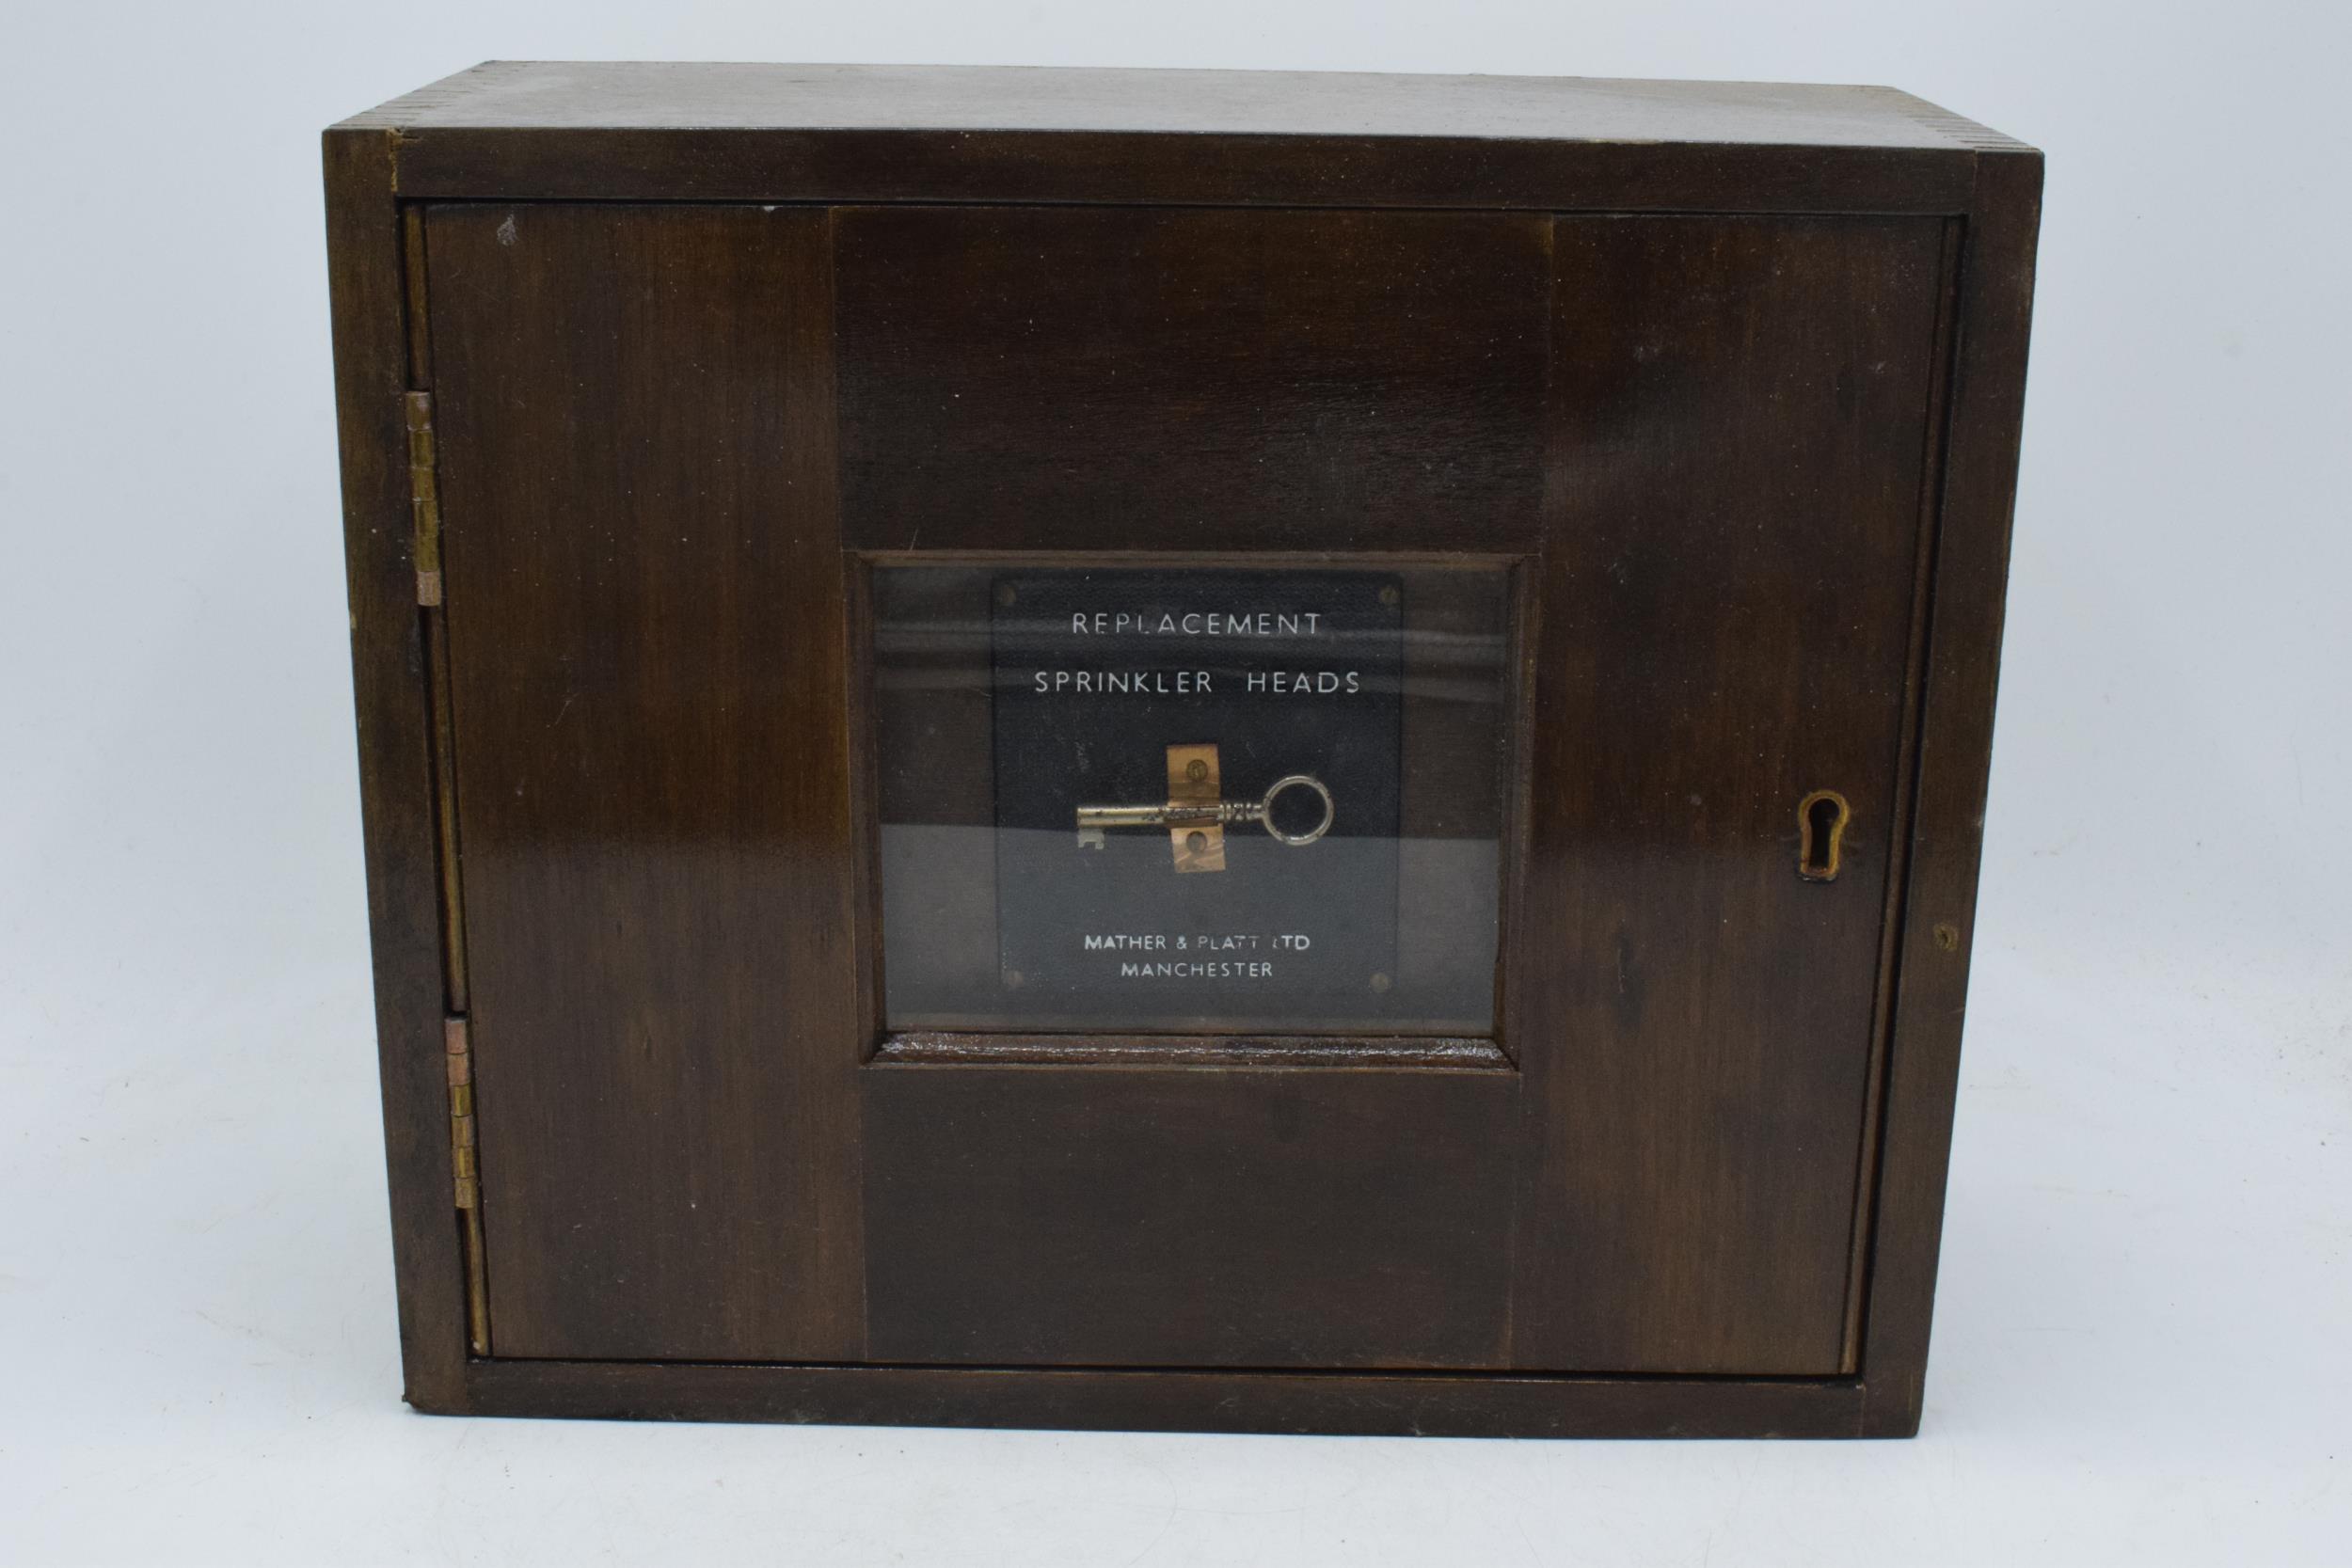 Vintage wooden cabinet, the centre panel enclosing a key 'Replacement Sprinkler Heads' by Mather &